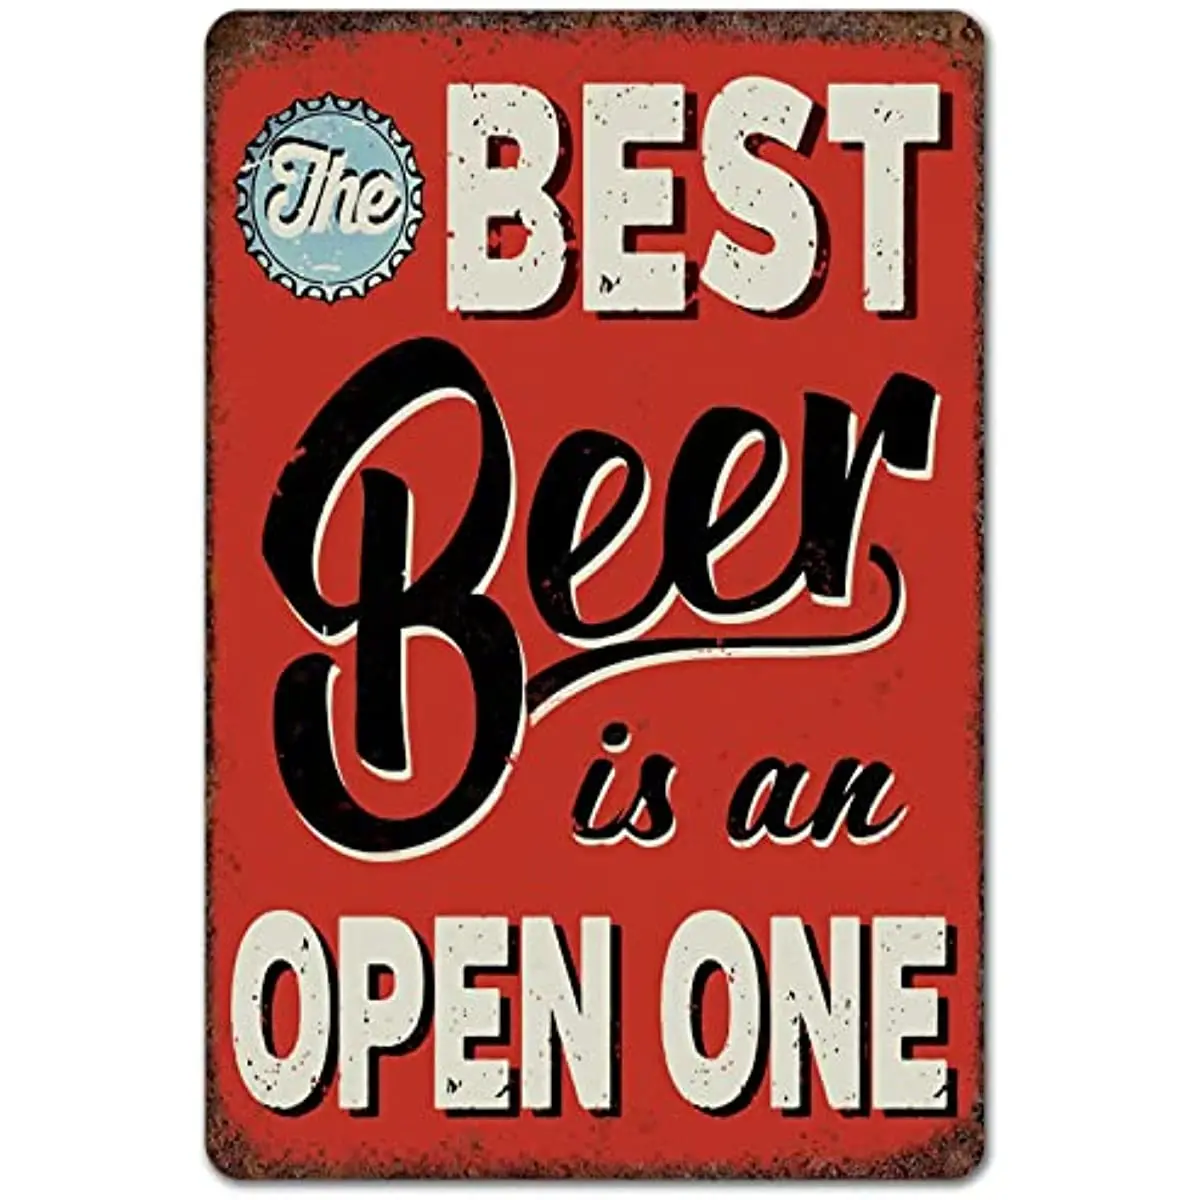 

New Man cave Vintage Metal Sign The Best Is An Open Bar Signs Wall Decor vintage decor posters farmhouse decor home decor